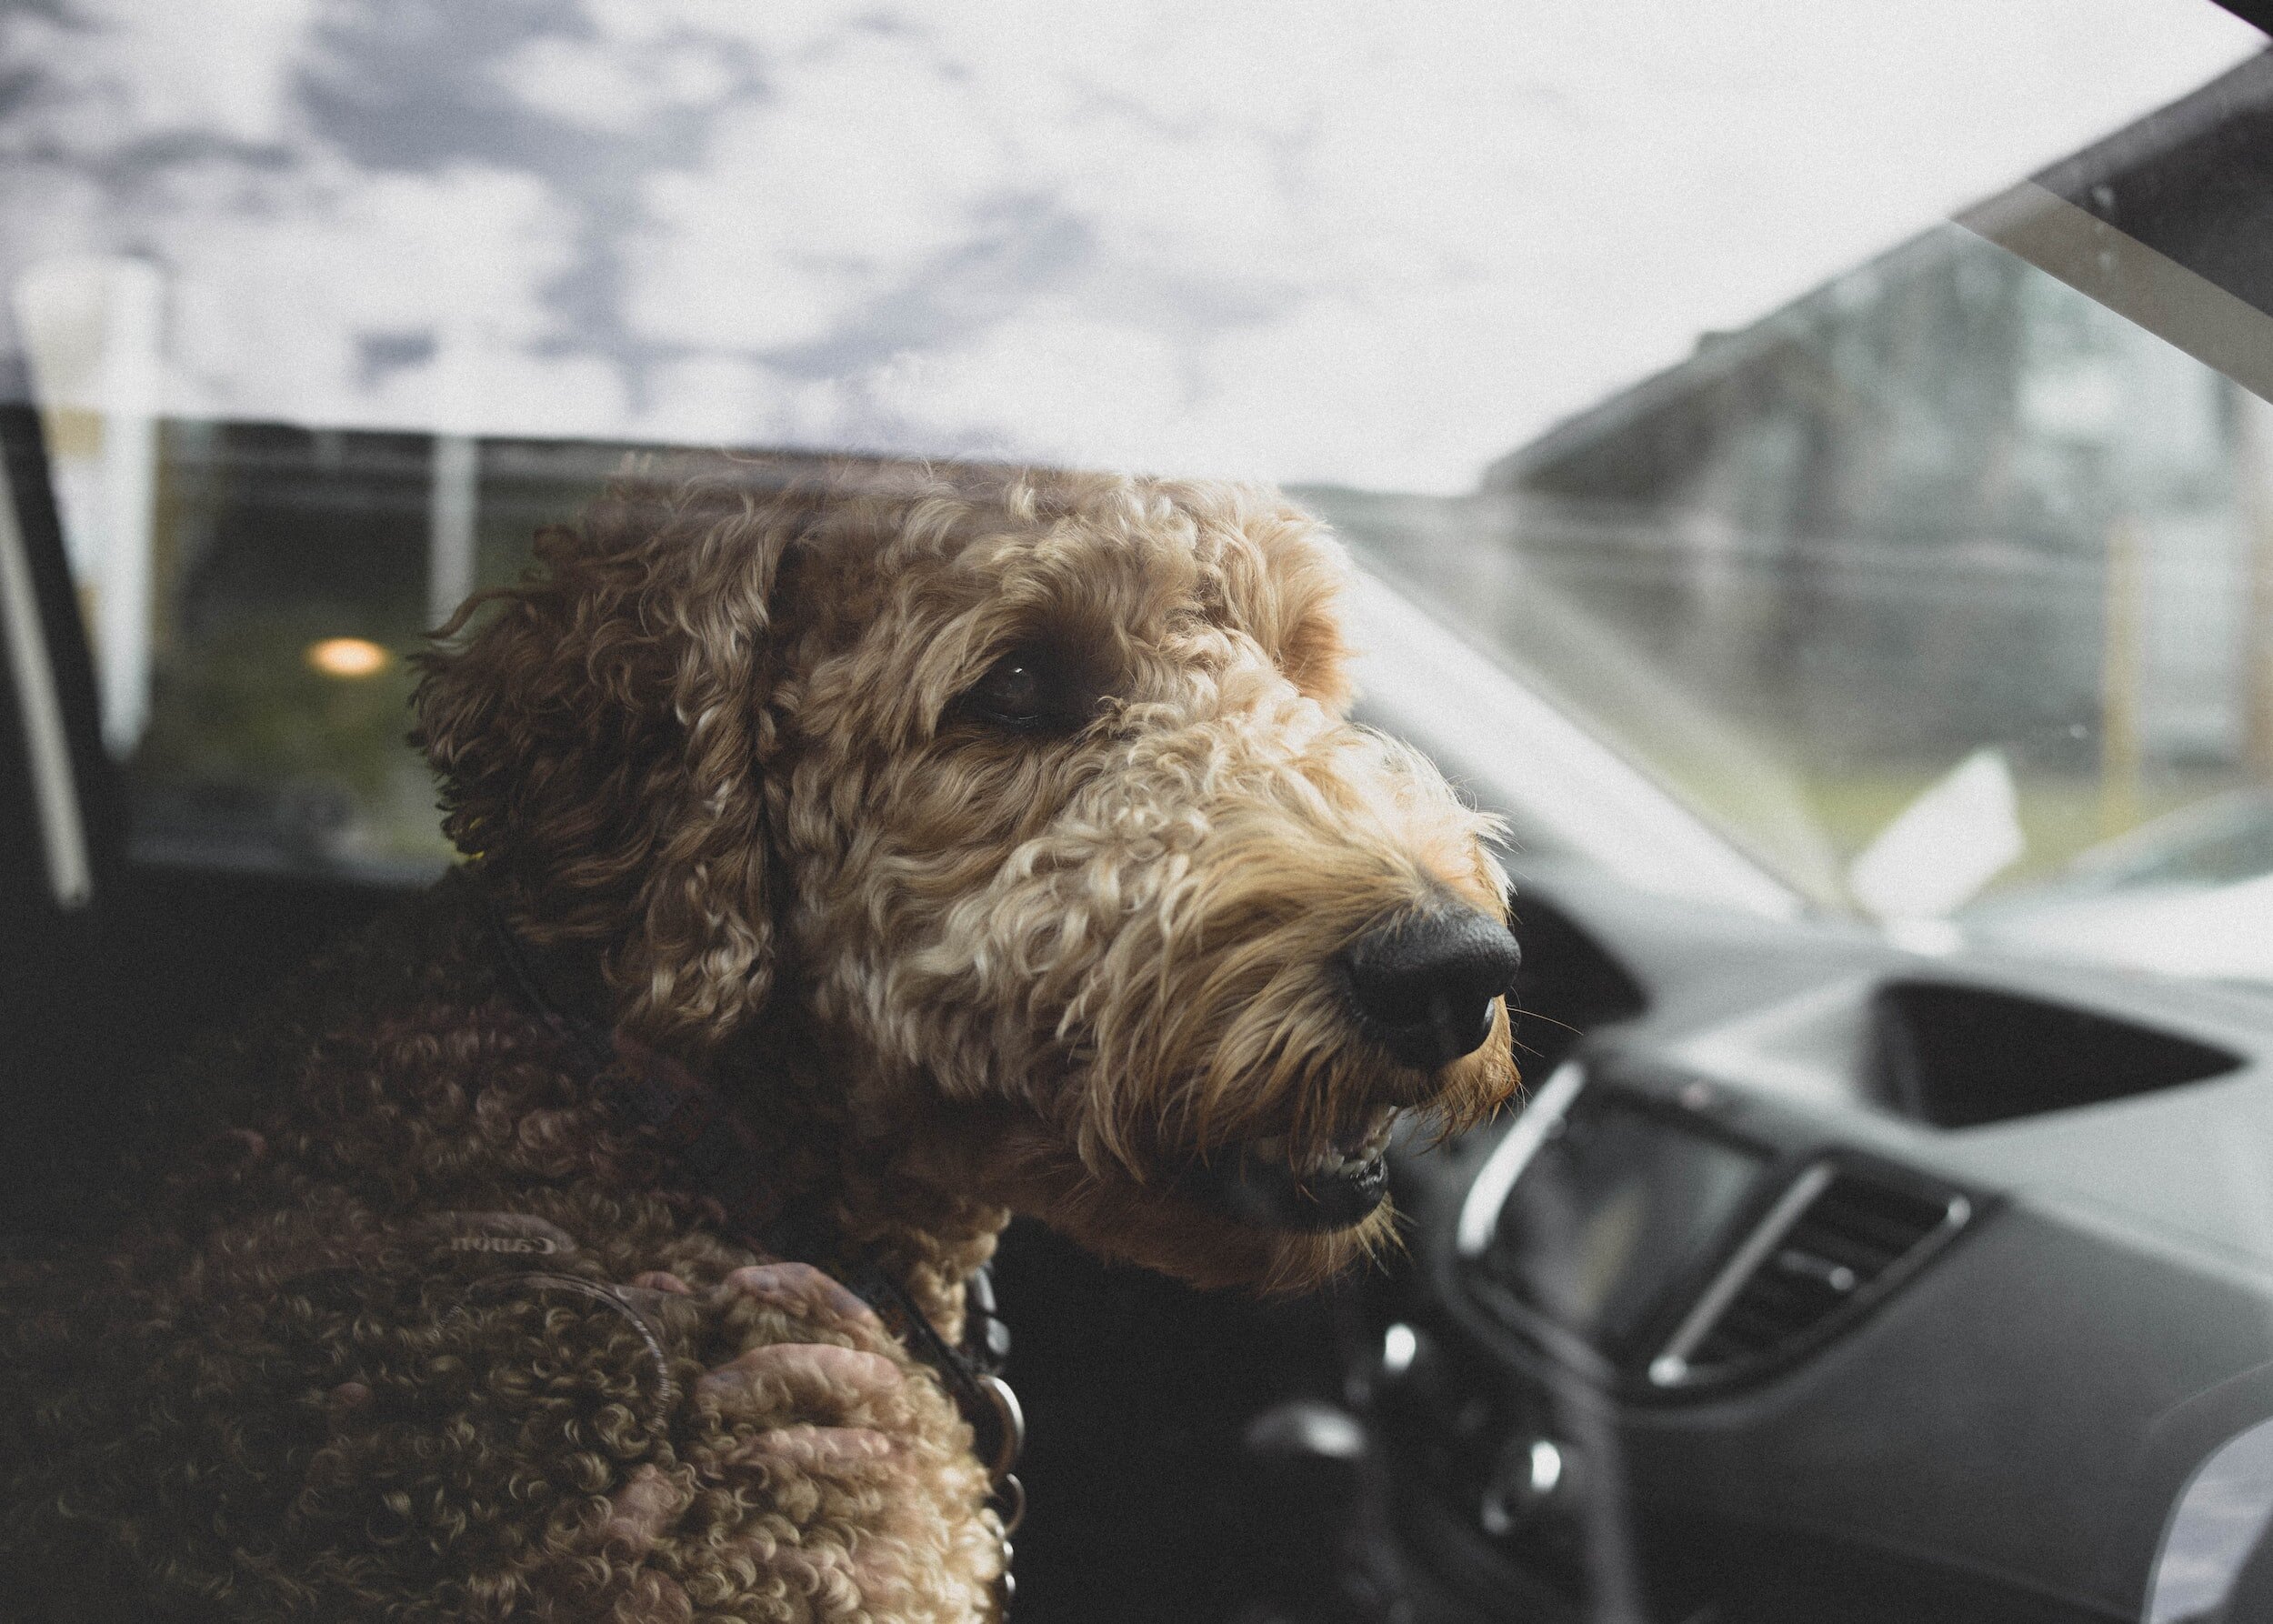 Can You Legally Break a Car Window to Save a Dog?